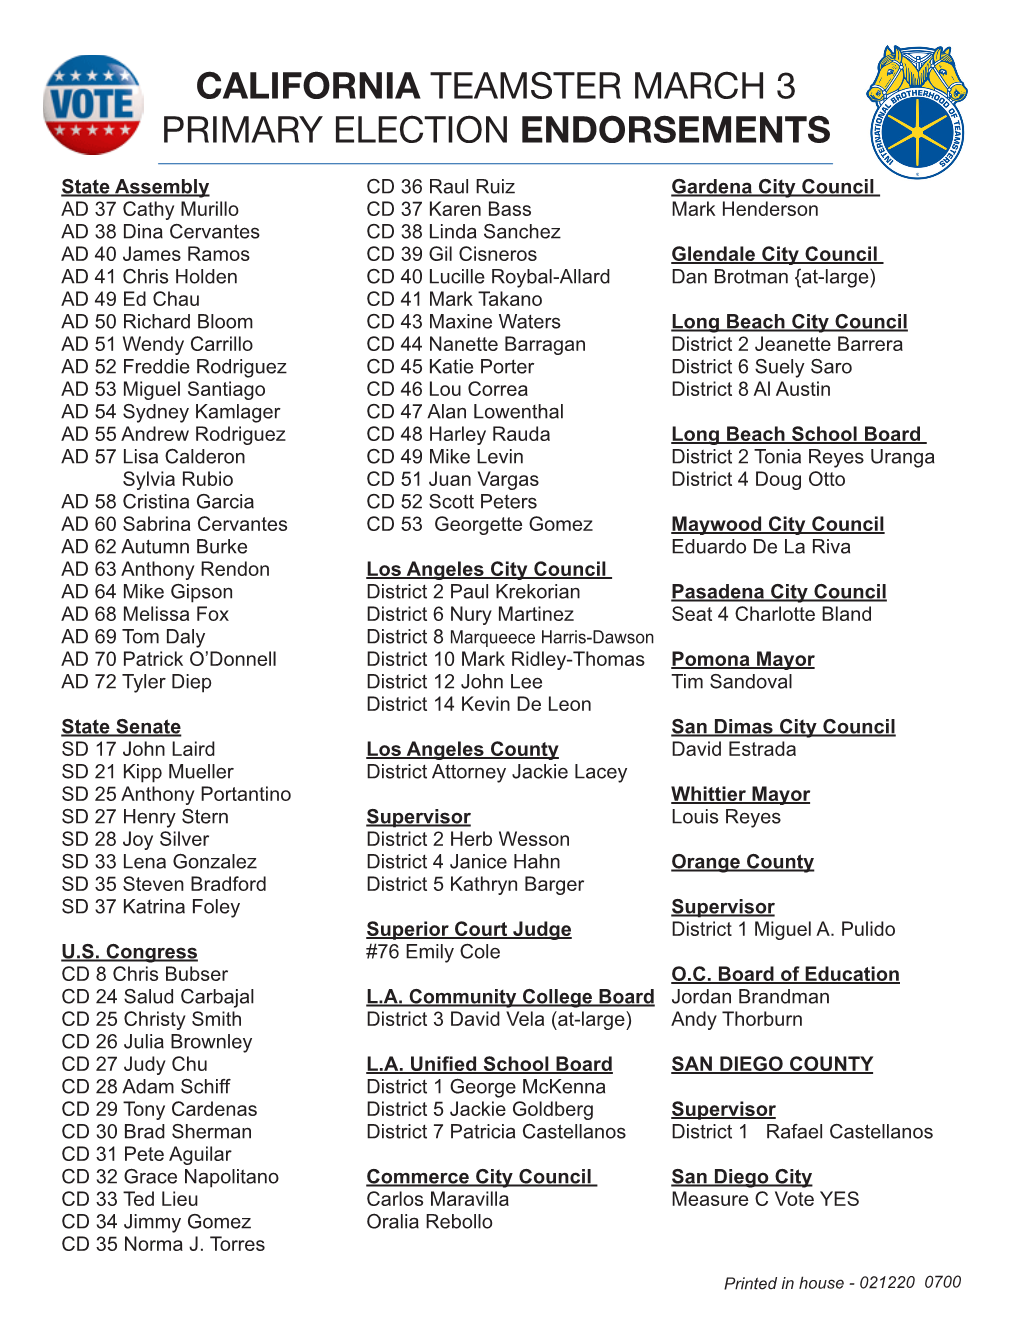 California Teamster March 3 Primary Election Endorsements